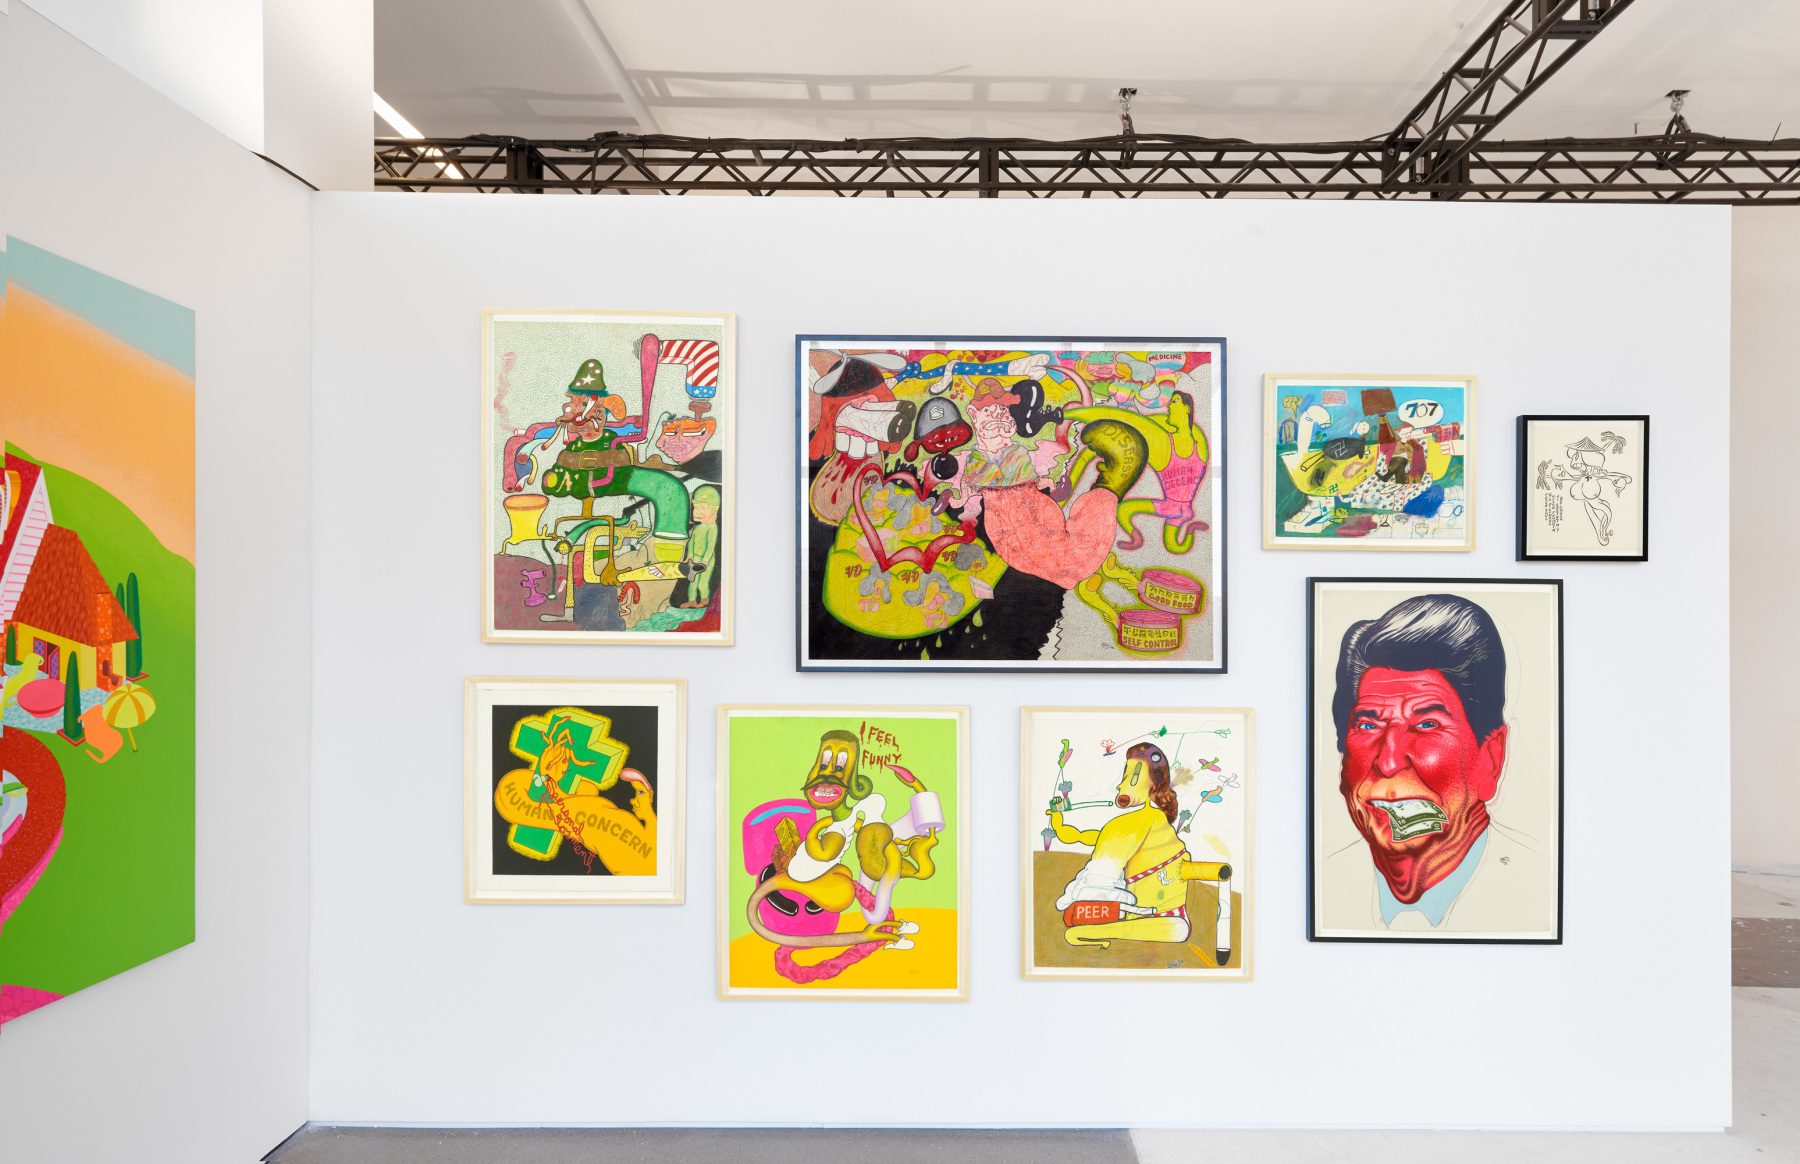 Installation view of Peter Saul: Early and Important Works at Independent, New York, 2016